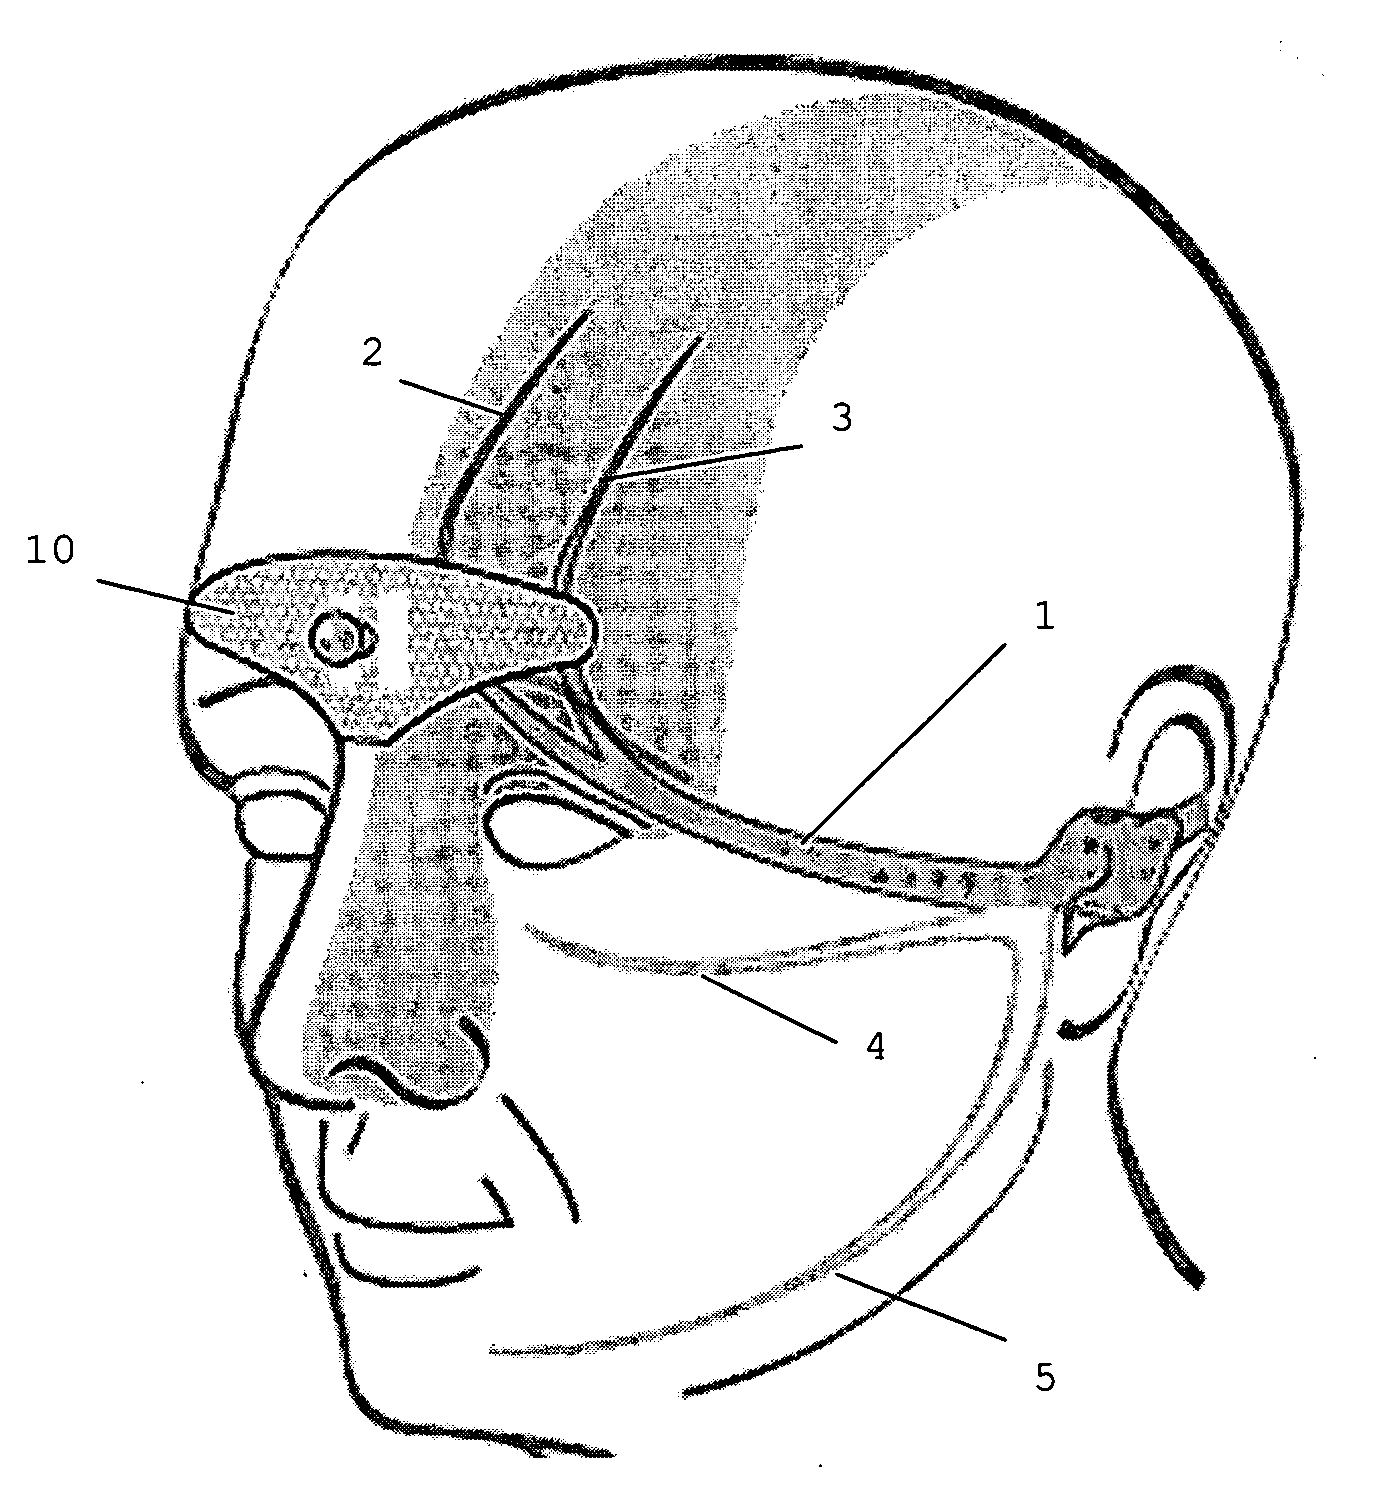 Device for the electrotherapeutic treatment of tension headaches